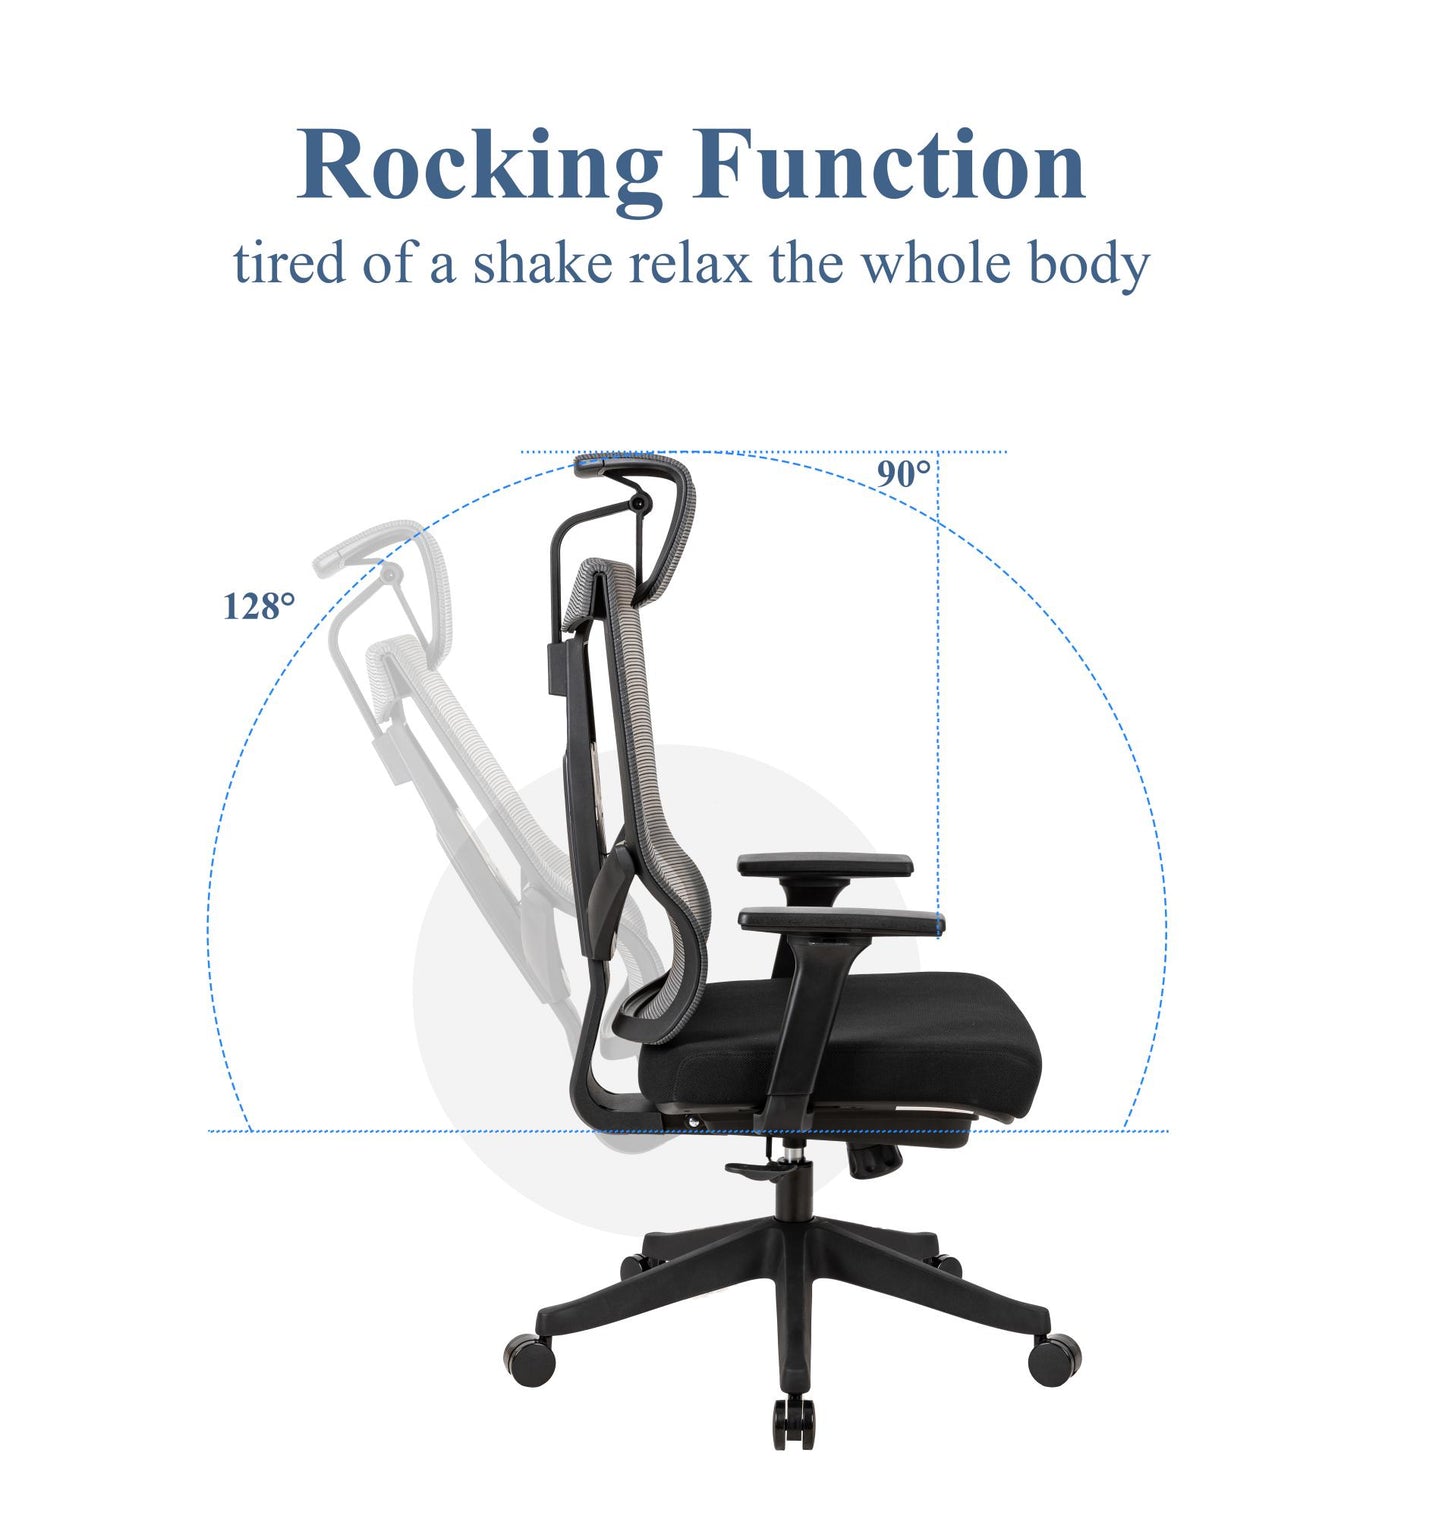 Executive Office Chair with Headrest, 2D Armrests, and Back Function